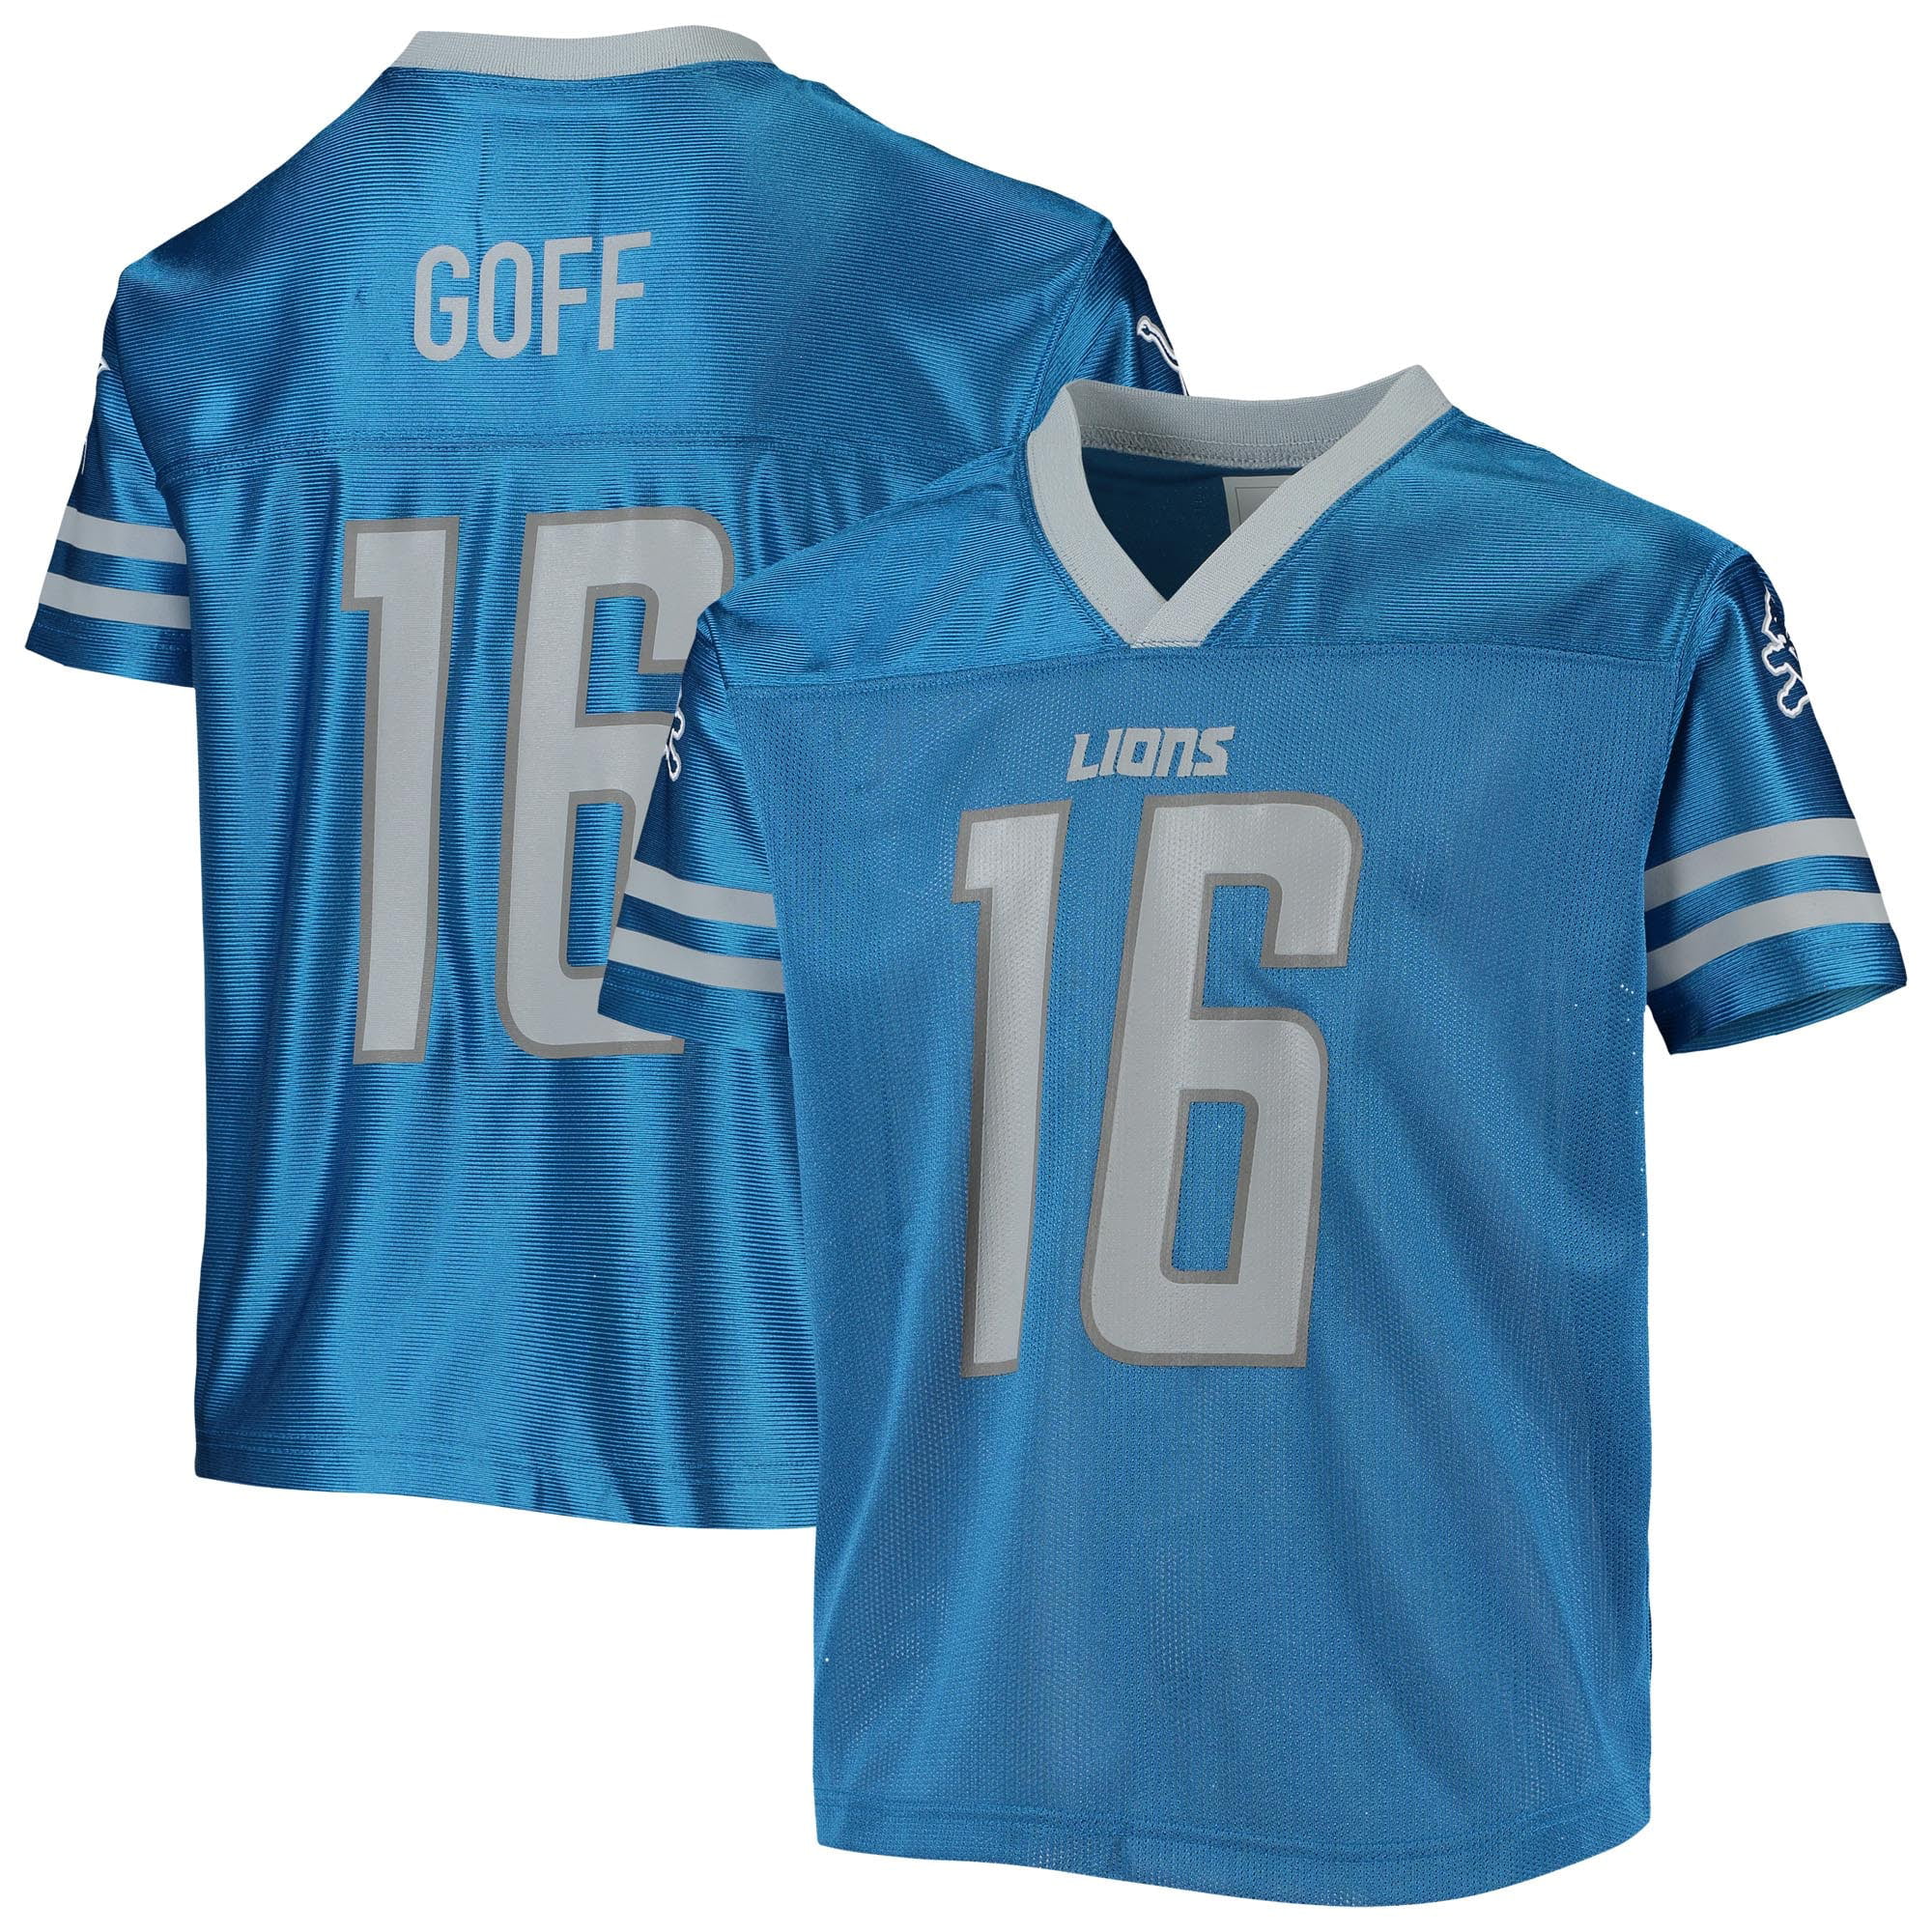 jared goff jersey youth